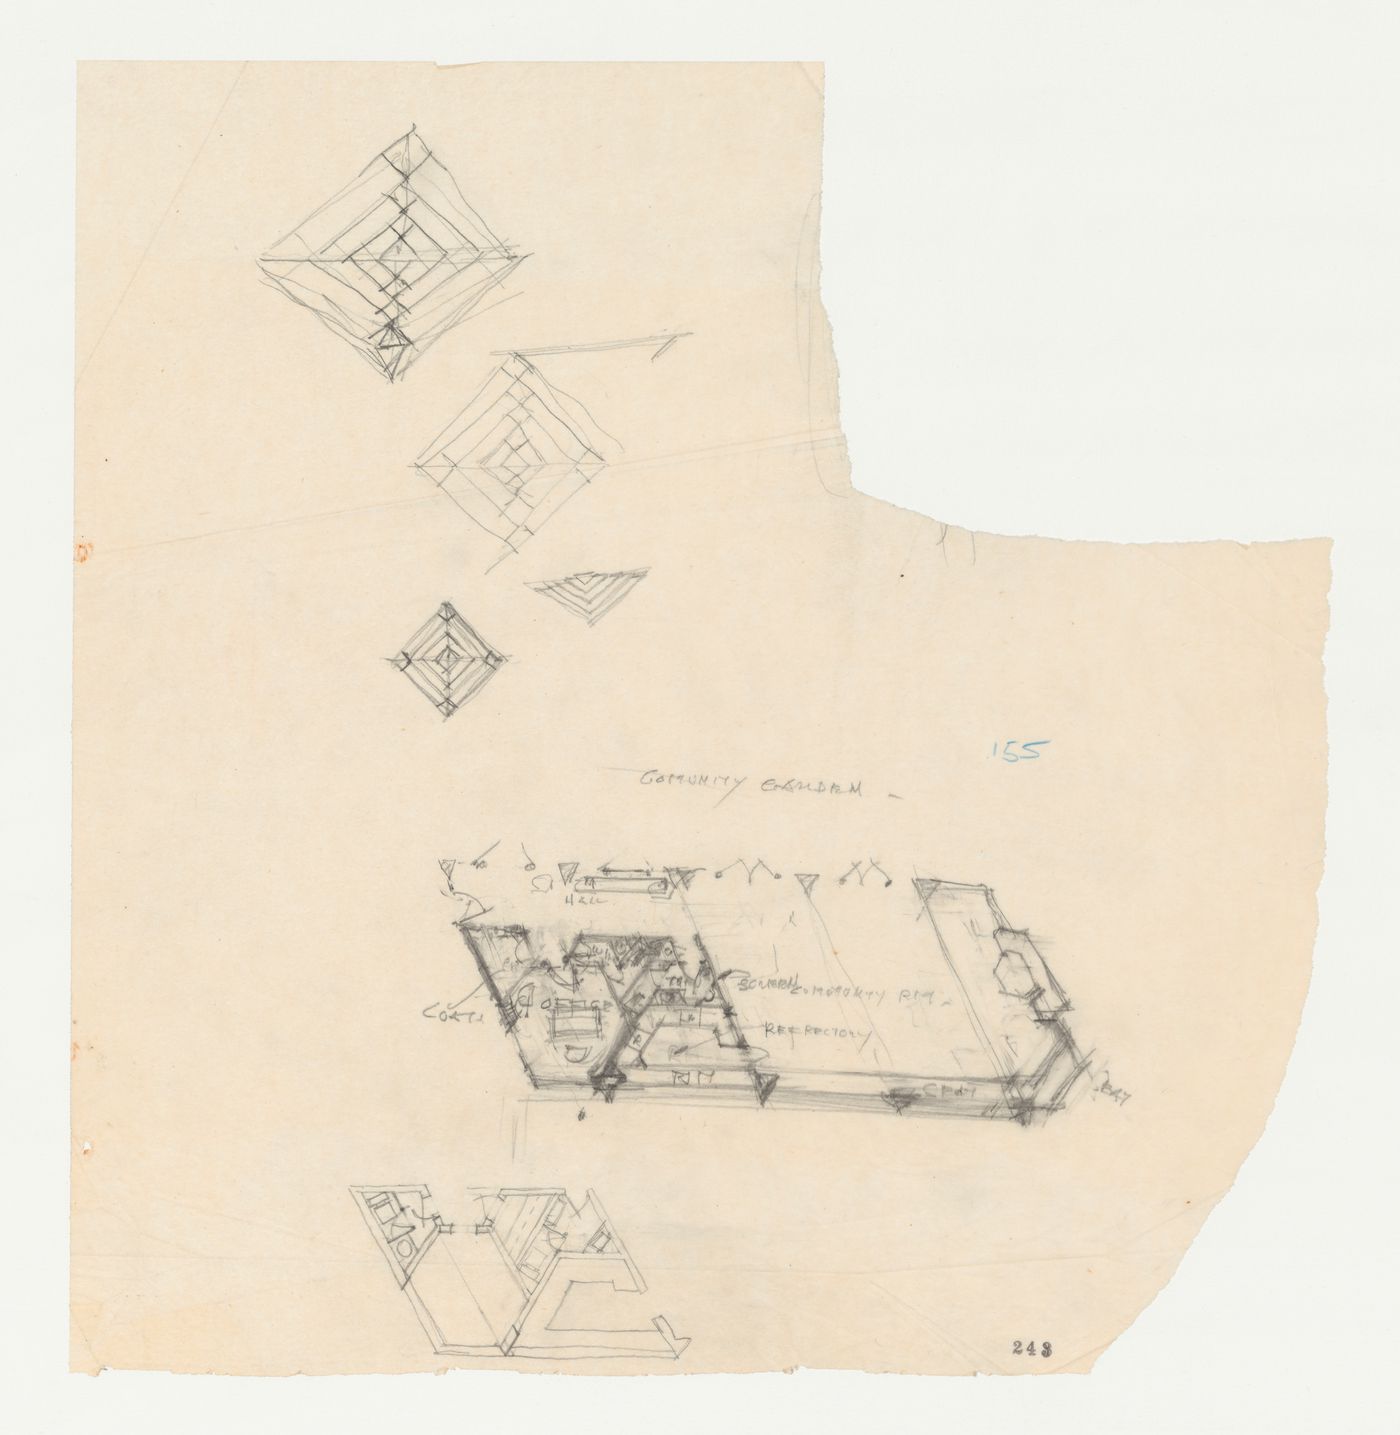 Wayfarers' Chapel, Palos Verdes, California: Two sketch plans for the parish house with sketches, possibly for a glass roof